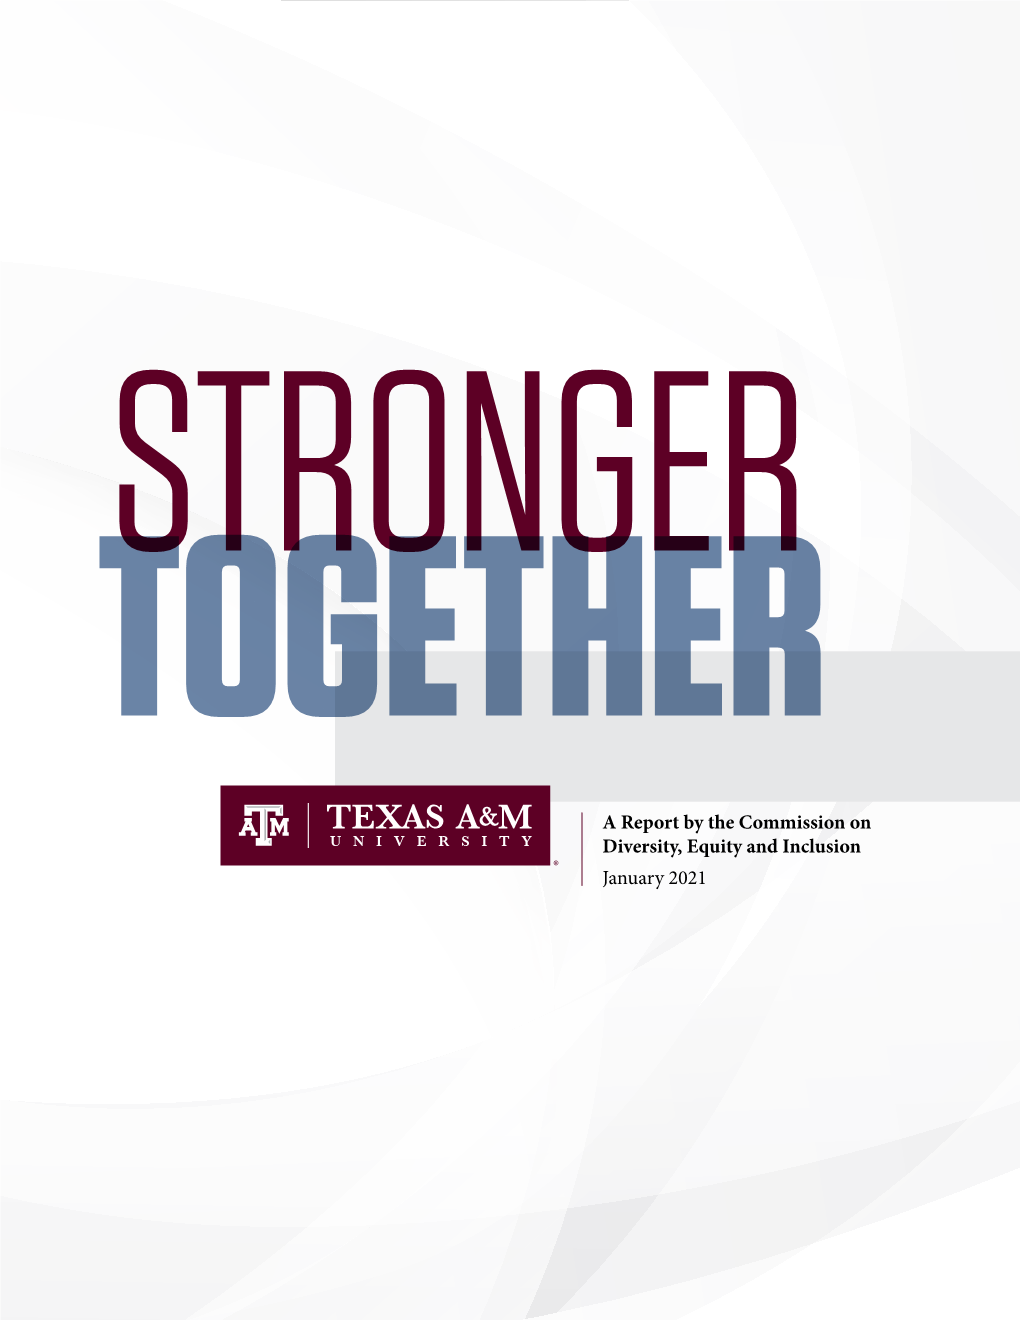 A Report by the Commission on Diversity, Equity and Inclusion January 2021 EXECUTIVE SUMMARY TEXAS A&M UNIVERSITY 4 EXECUTIVE SUMMARY